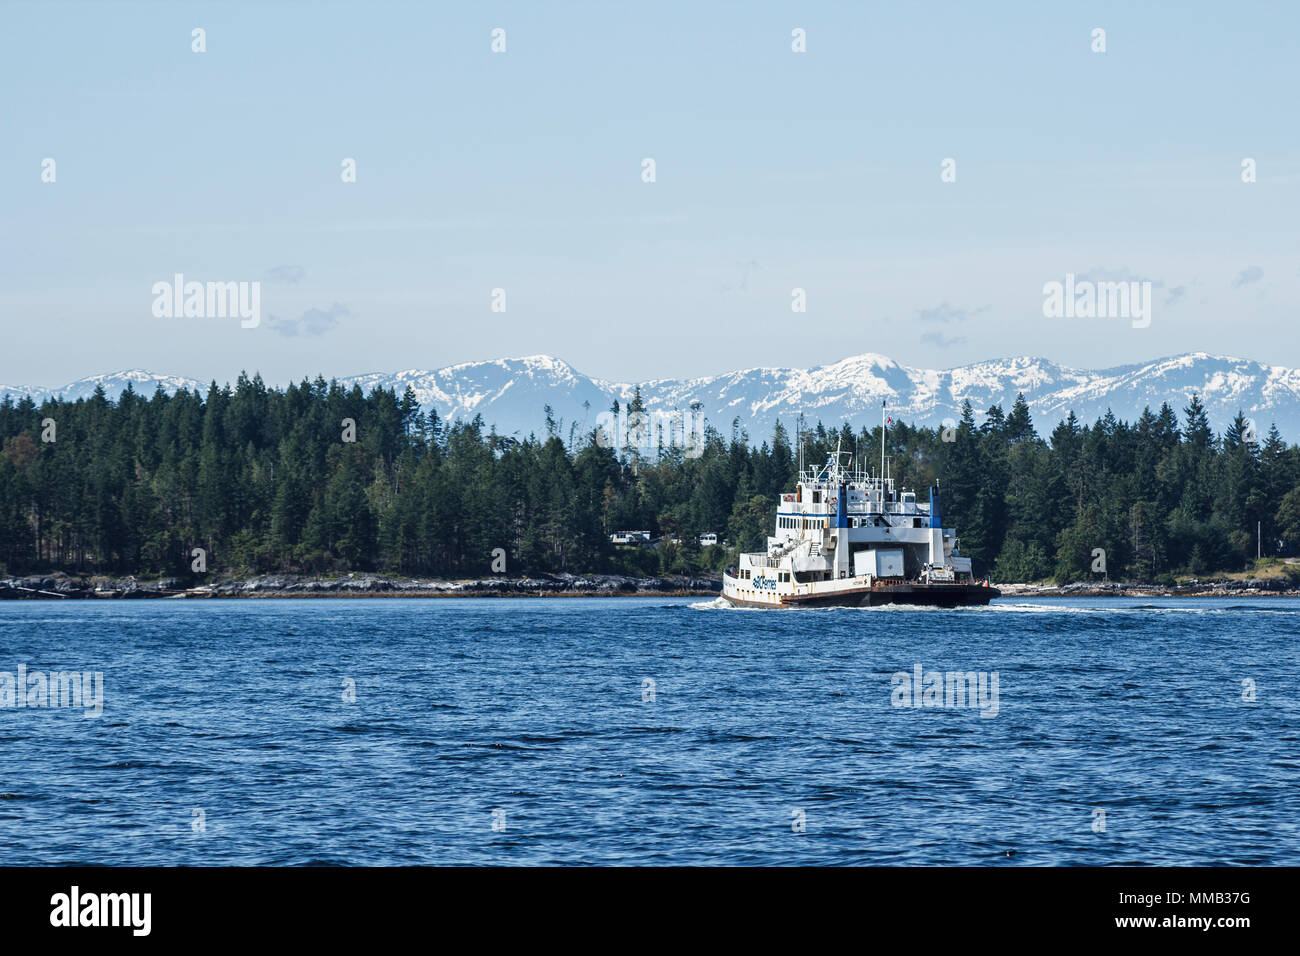 On a bright summer day, the BC Ferries vessel 'North Island Princess' nears Texada Island, with the snow-covered peaks of the Coast Range beyond. Stock Photo